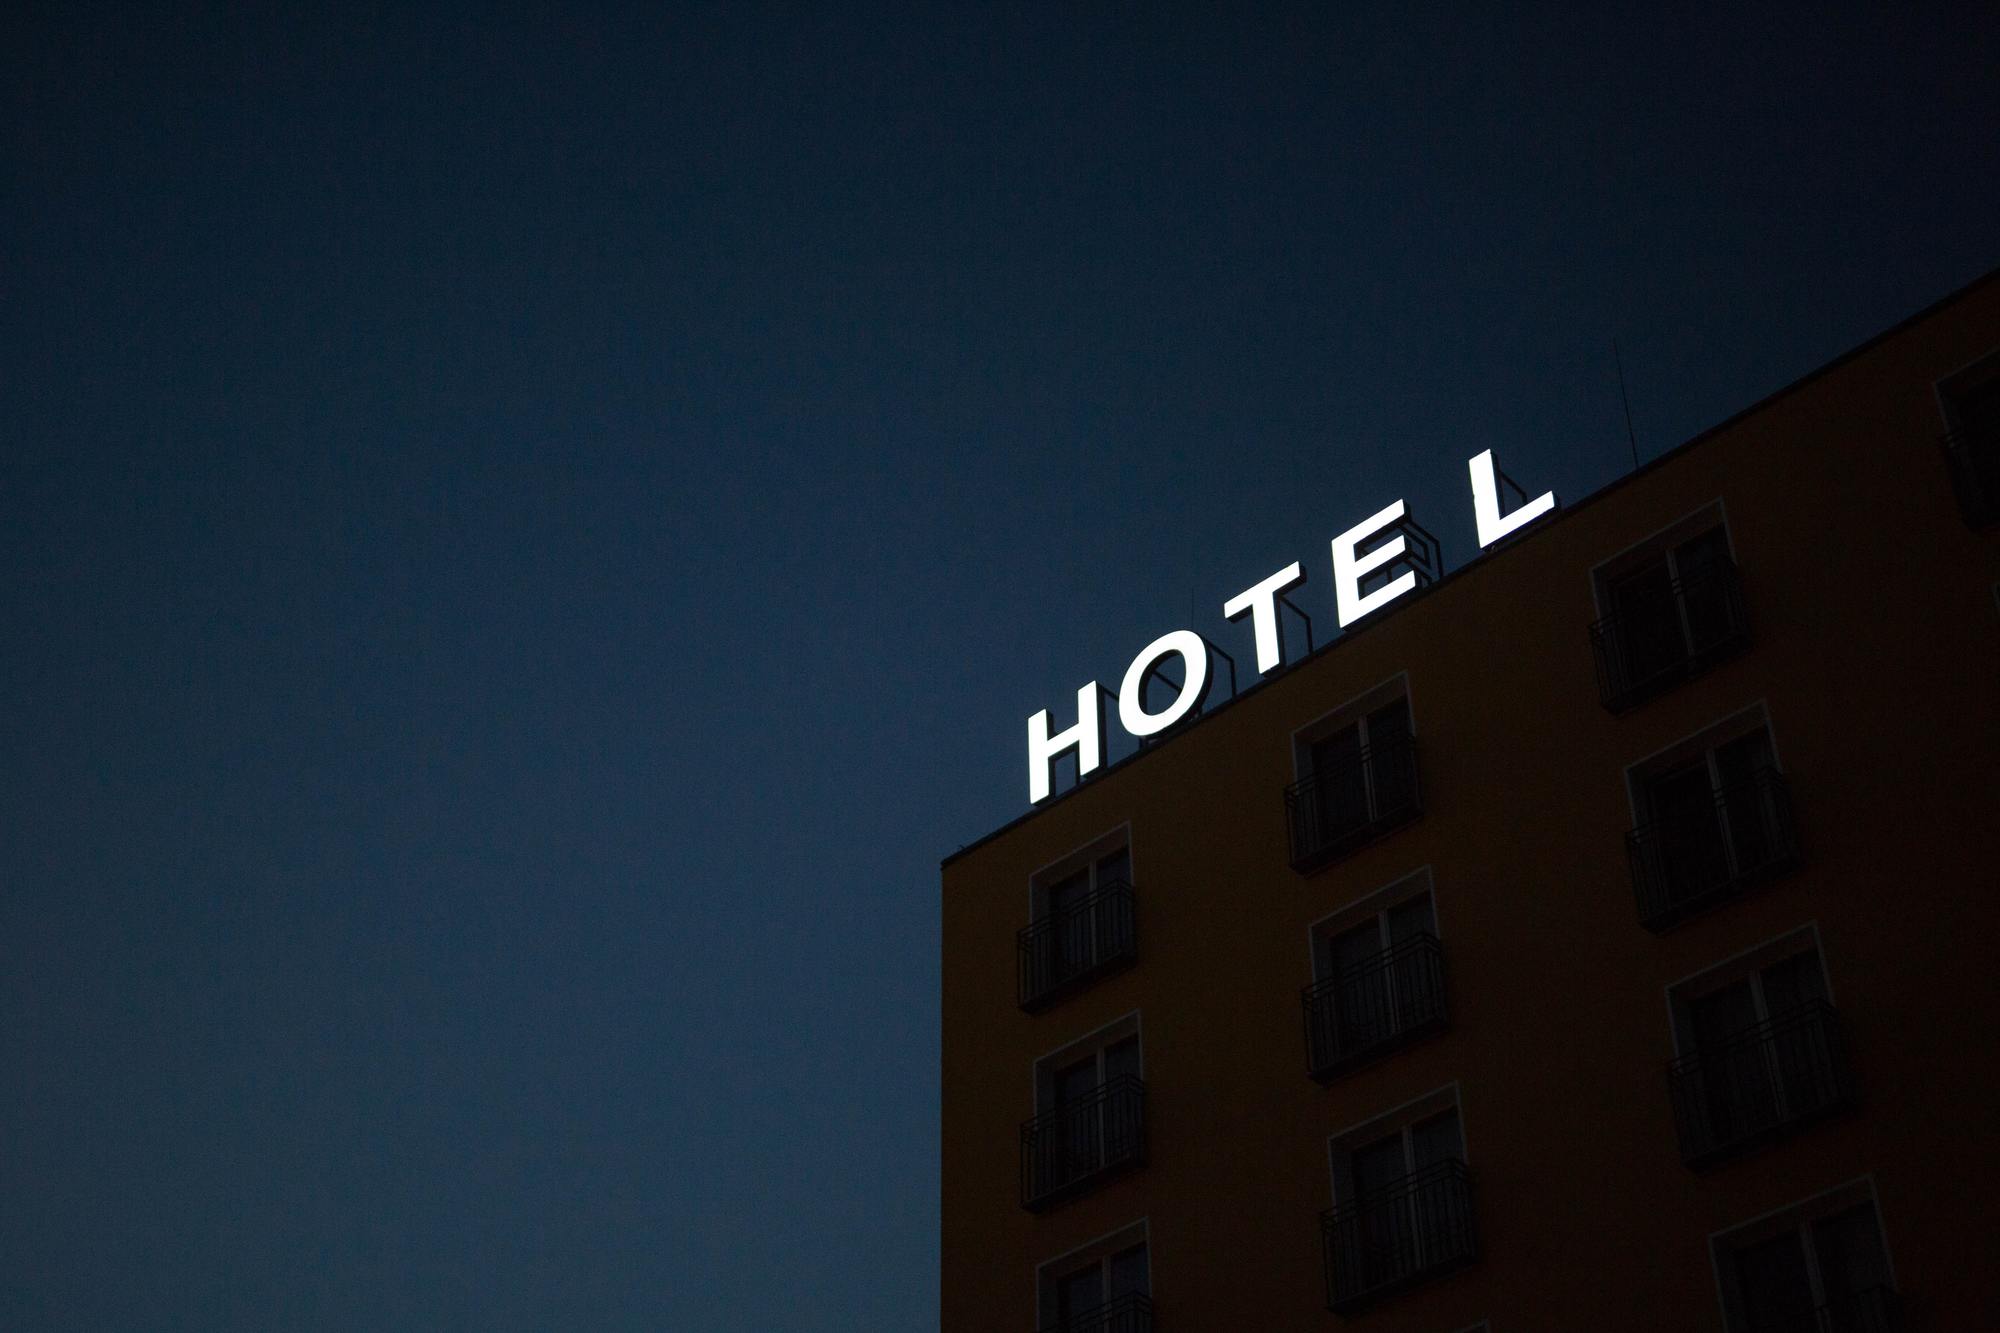 Hotels, Motels, and Inns: A List of the Top 10 Types of Lodging